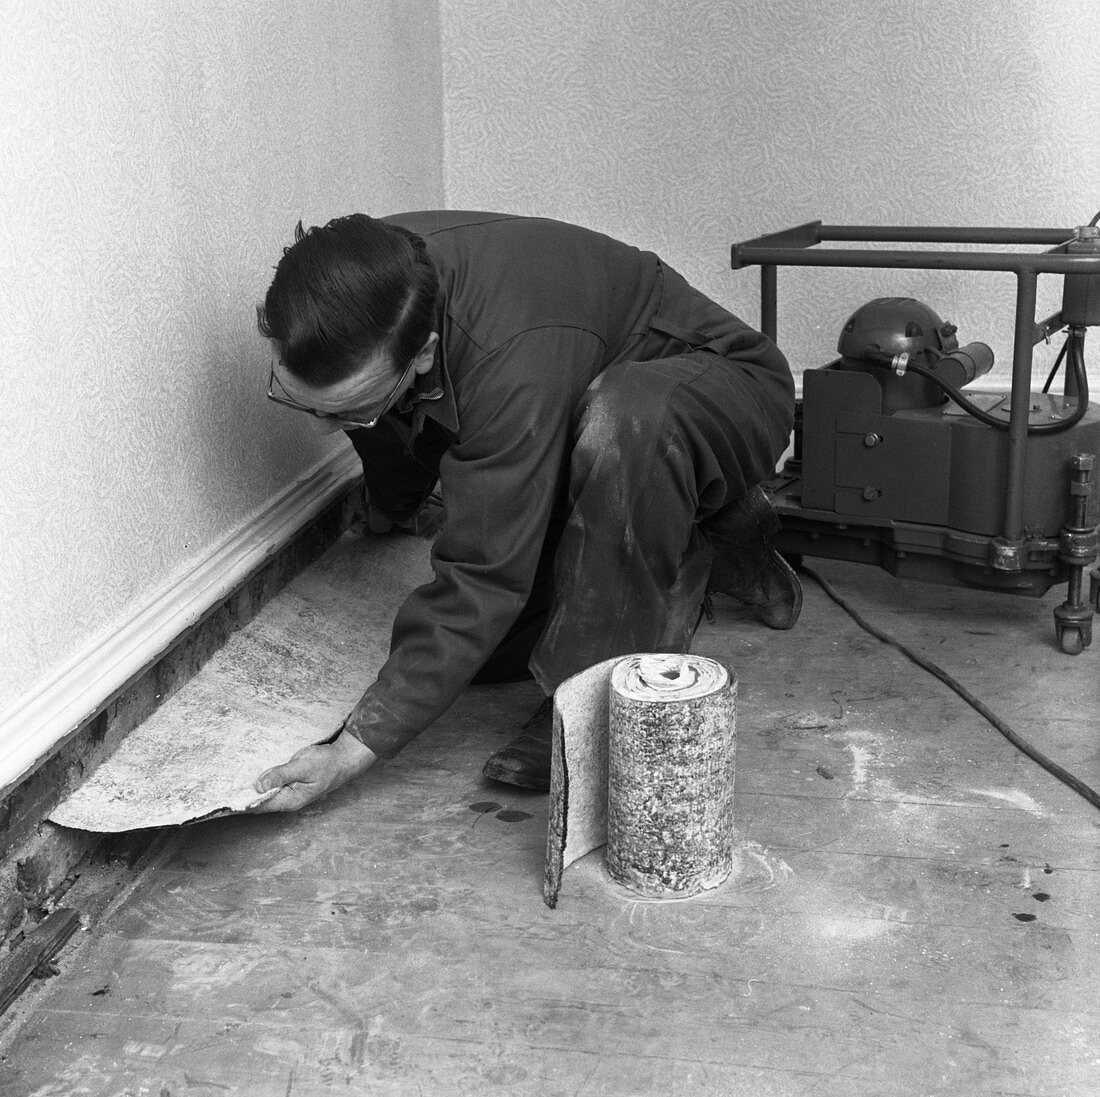 Installing a damp proof course in a house, 1957